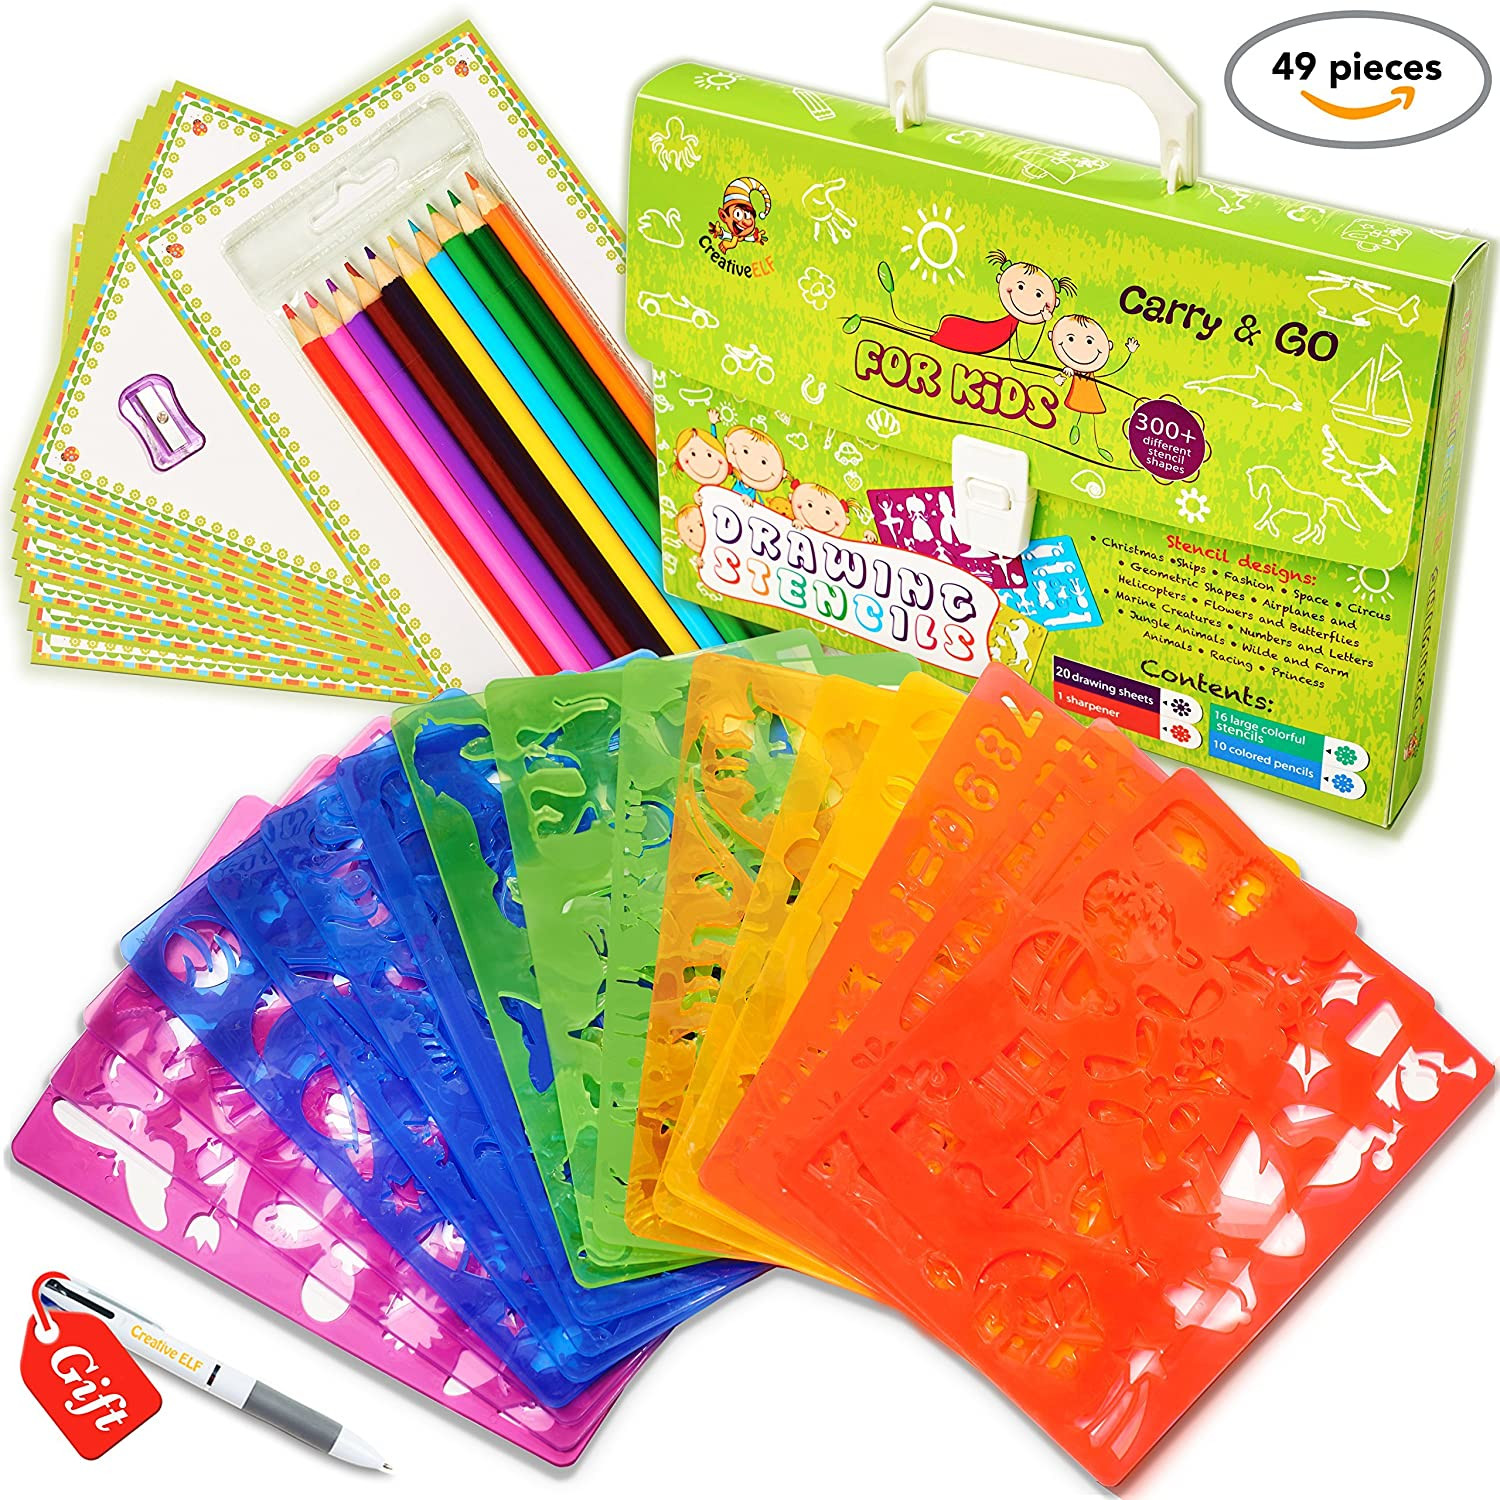 Top 23 Craft Kits for 5 Year Olds Home, Family, Style and Art Ideas